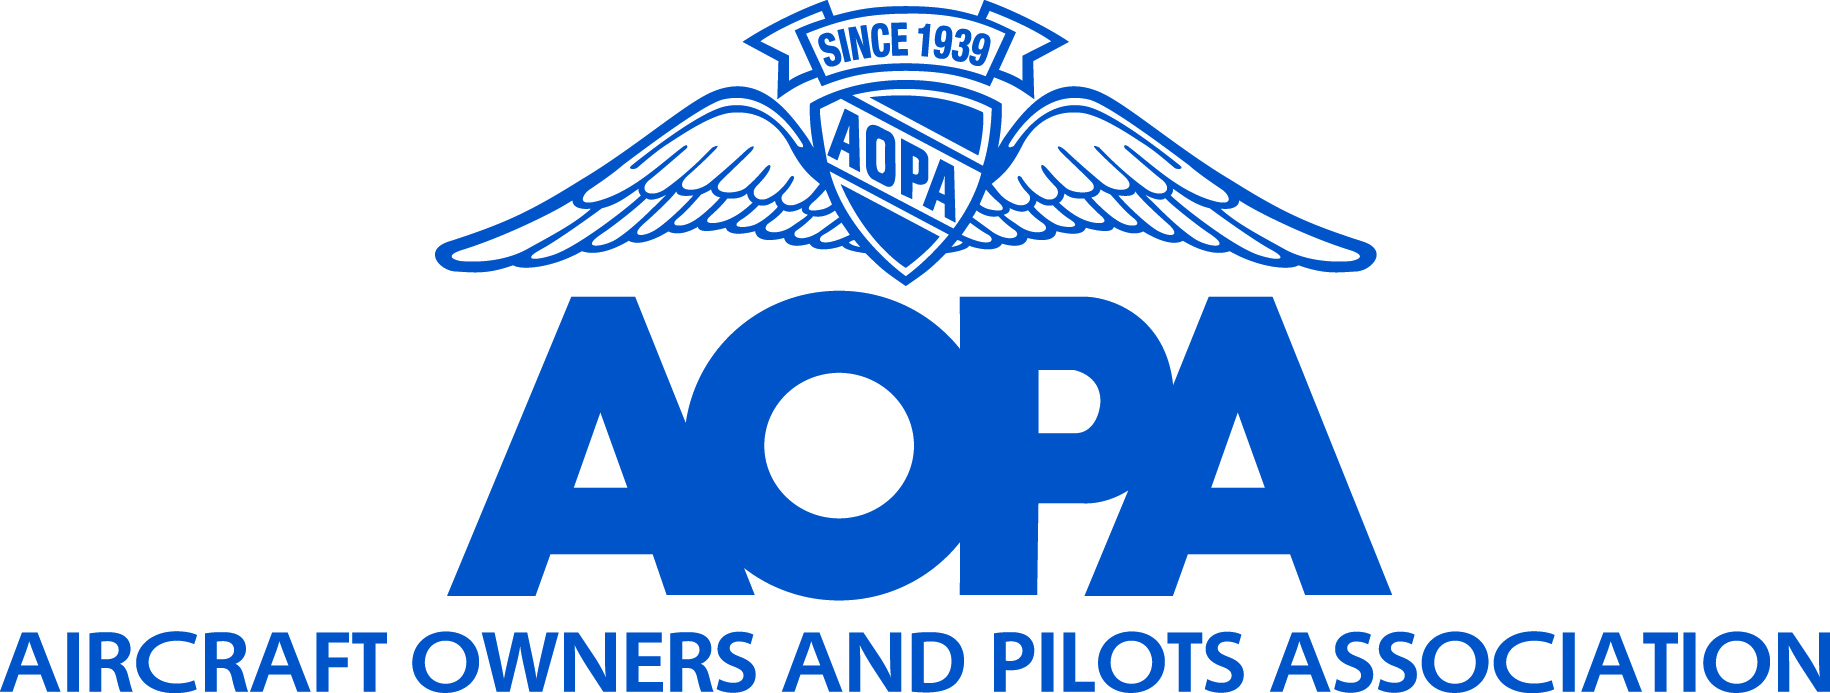 Why writing for AOPA is a big